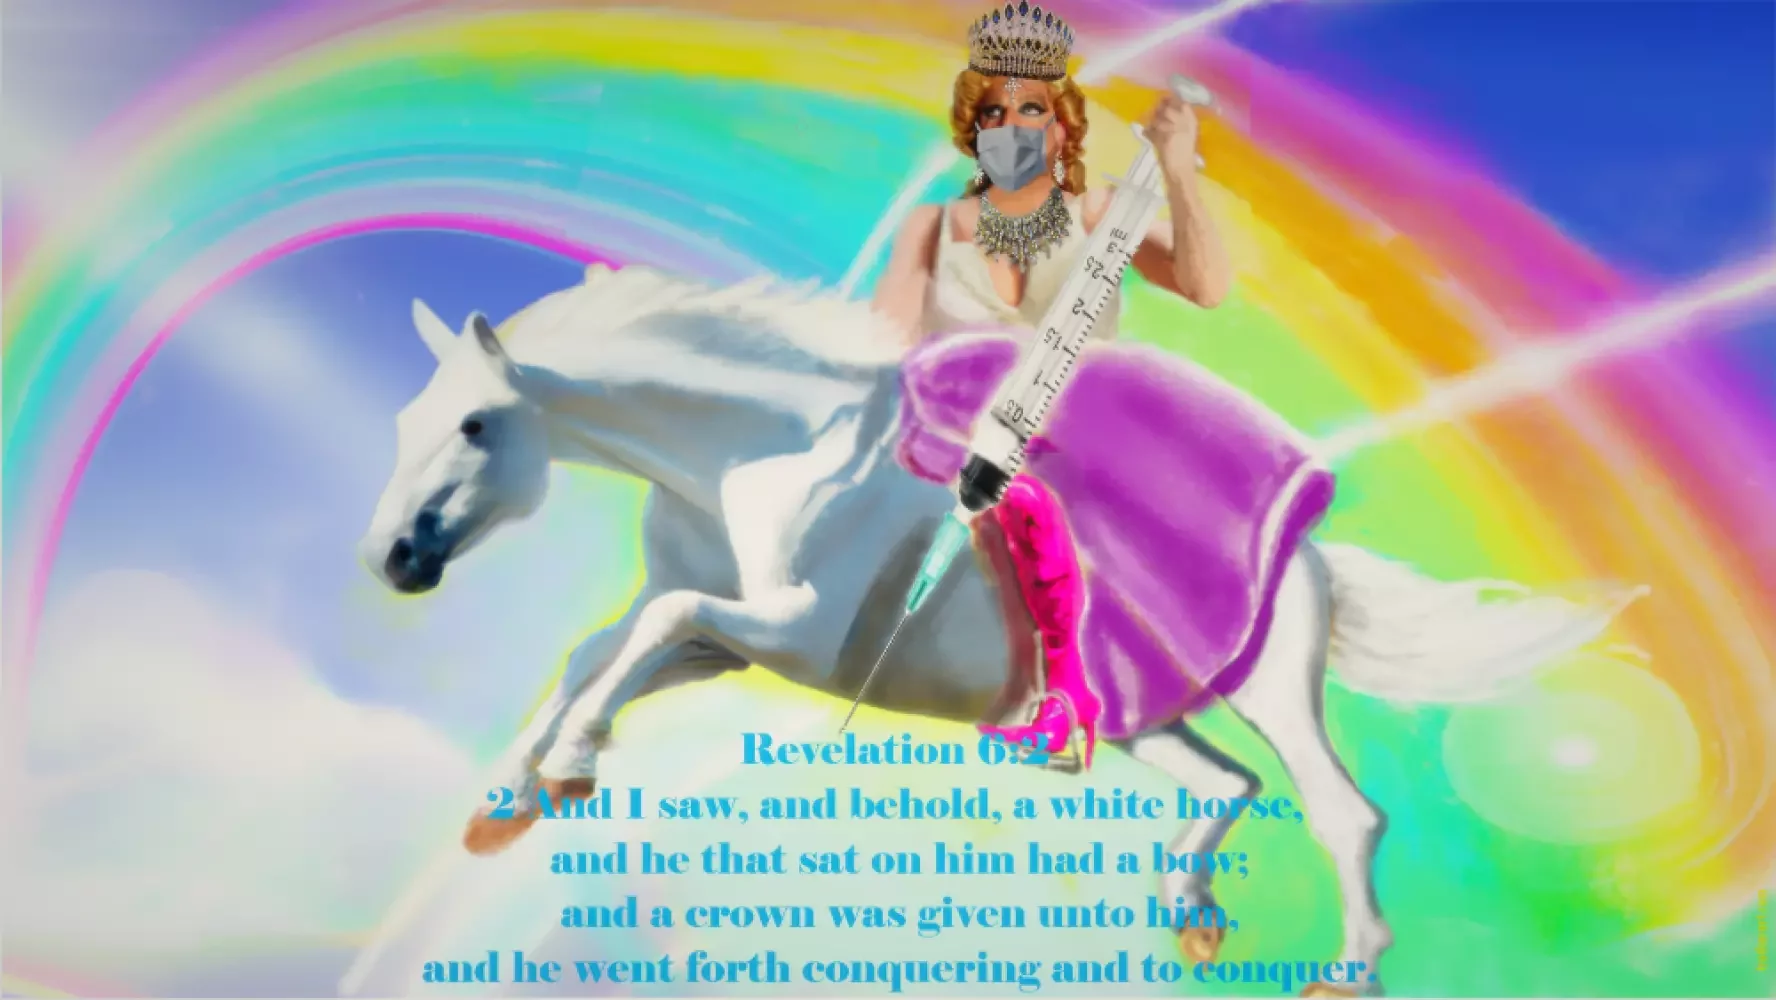 DRAG QUEEN SITTING ON THE WHITE HORSE OF REVELATION IN THE BIBLE CARRYING A LARGE SYRINGE